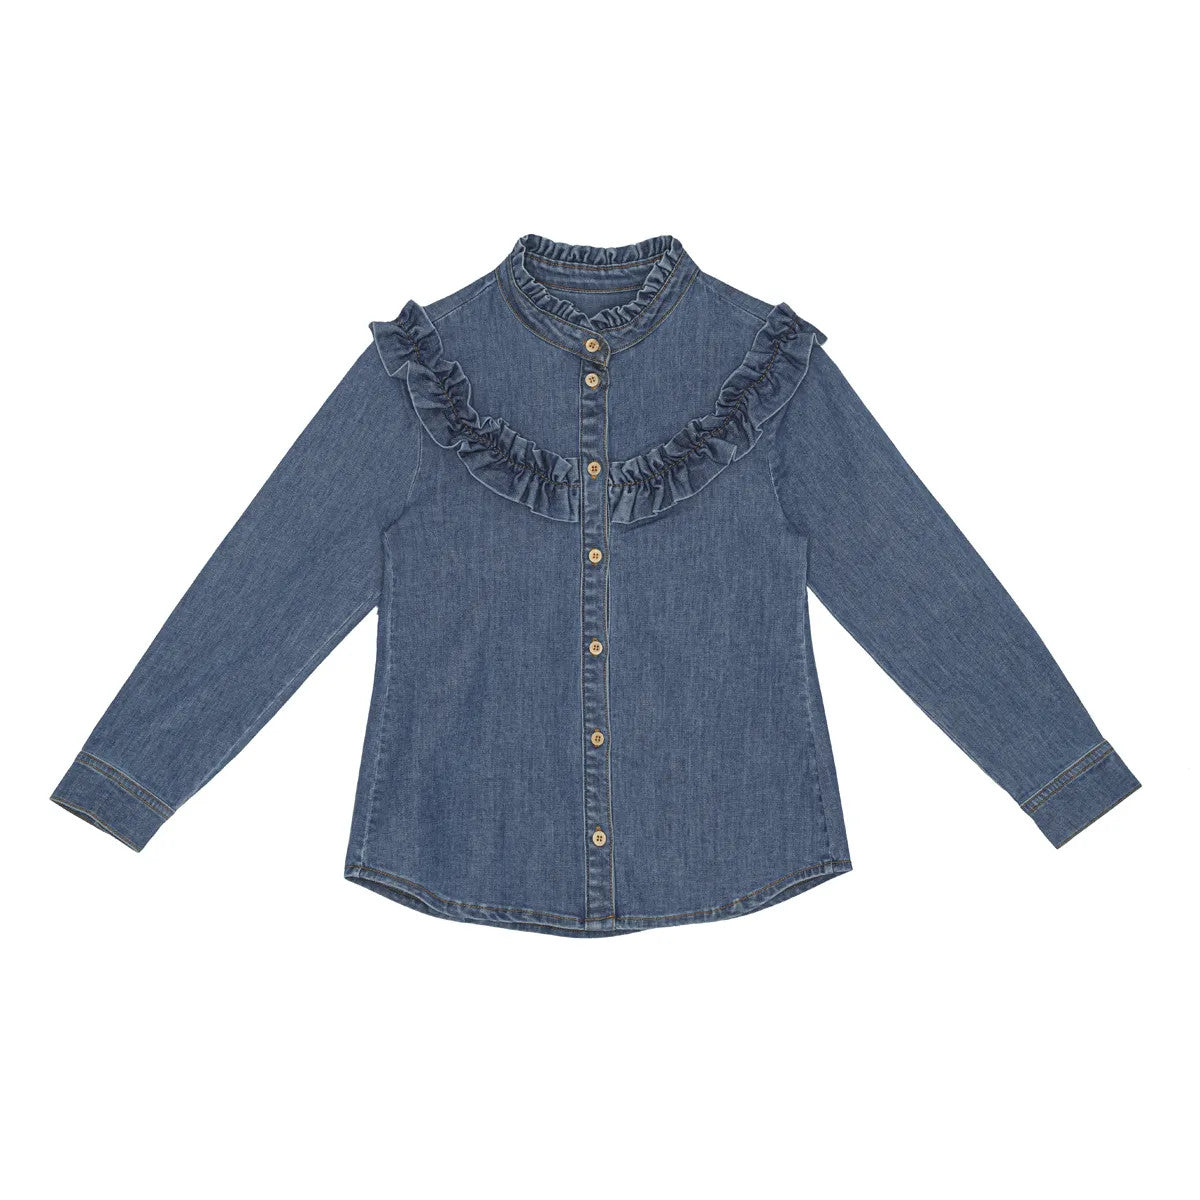 Little Hedonist slim fit blue shirt with ruffles in front and back. Super girly and though at the same time!